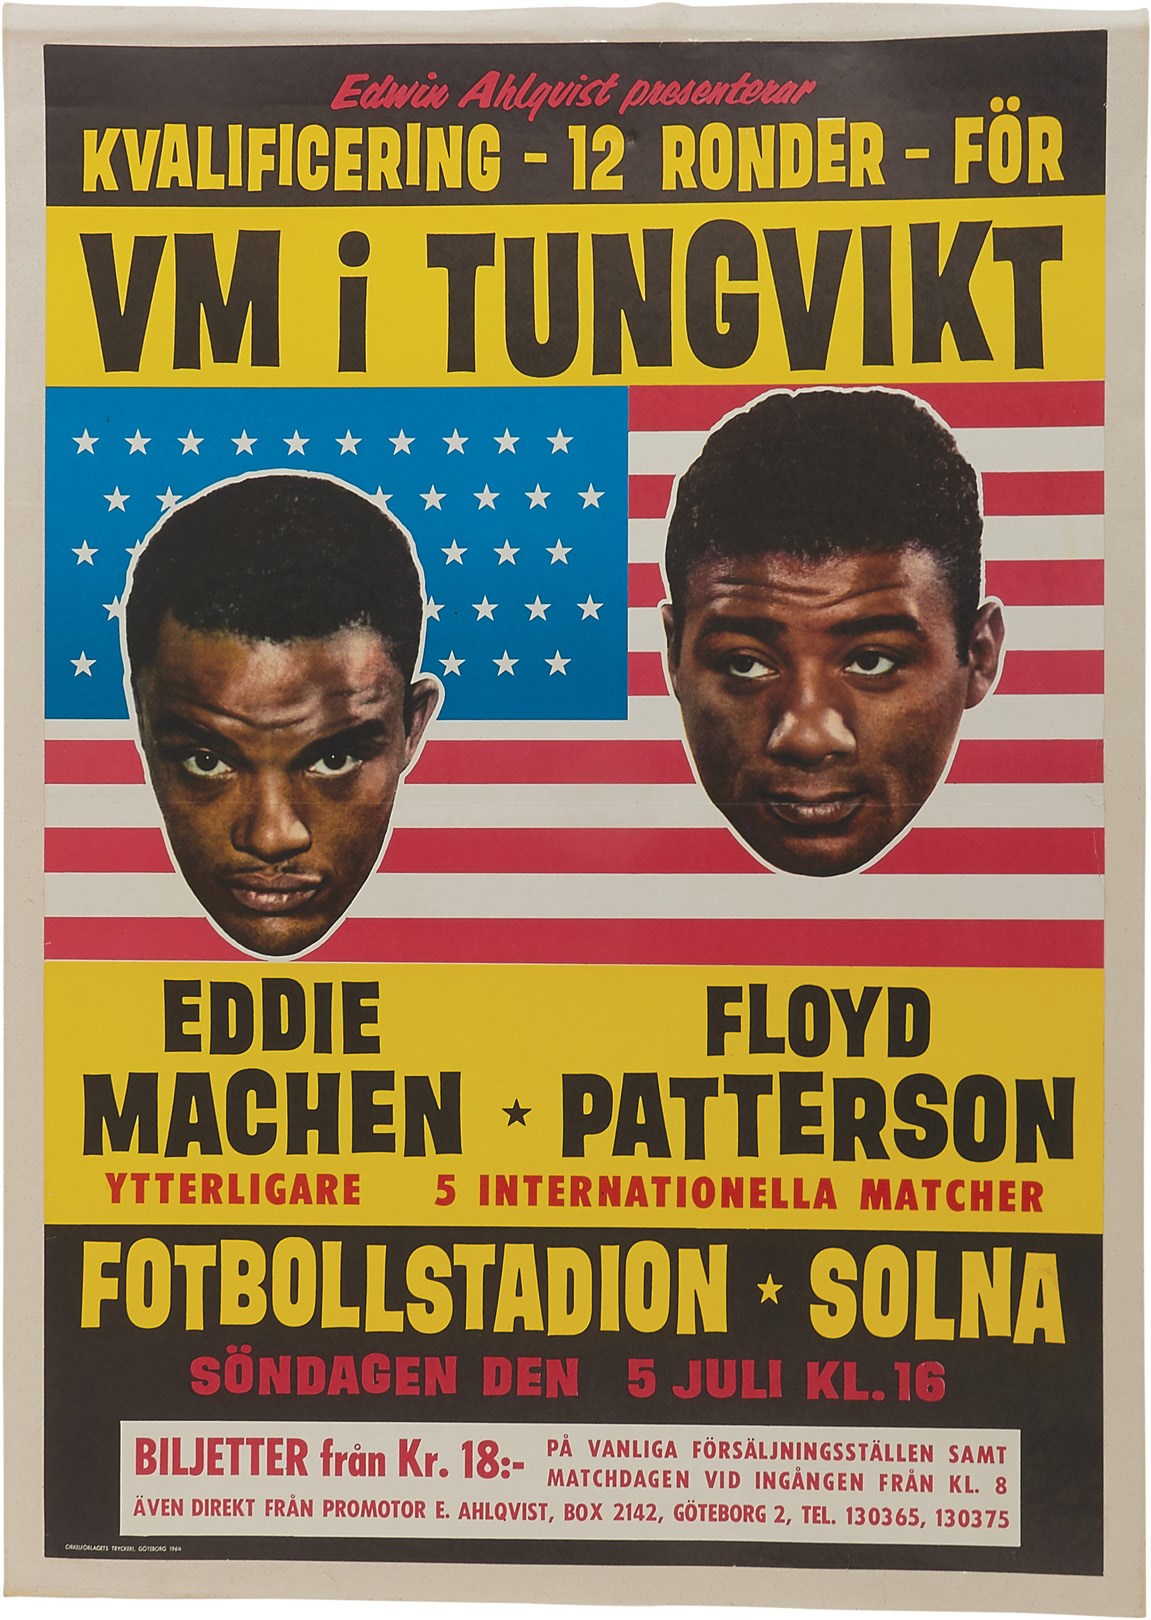 Muhammad Ali & Boxing - Patterson-Machen On Site Poster